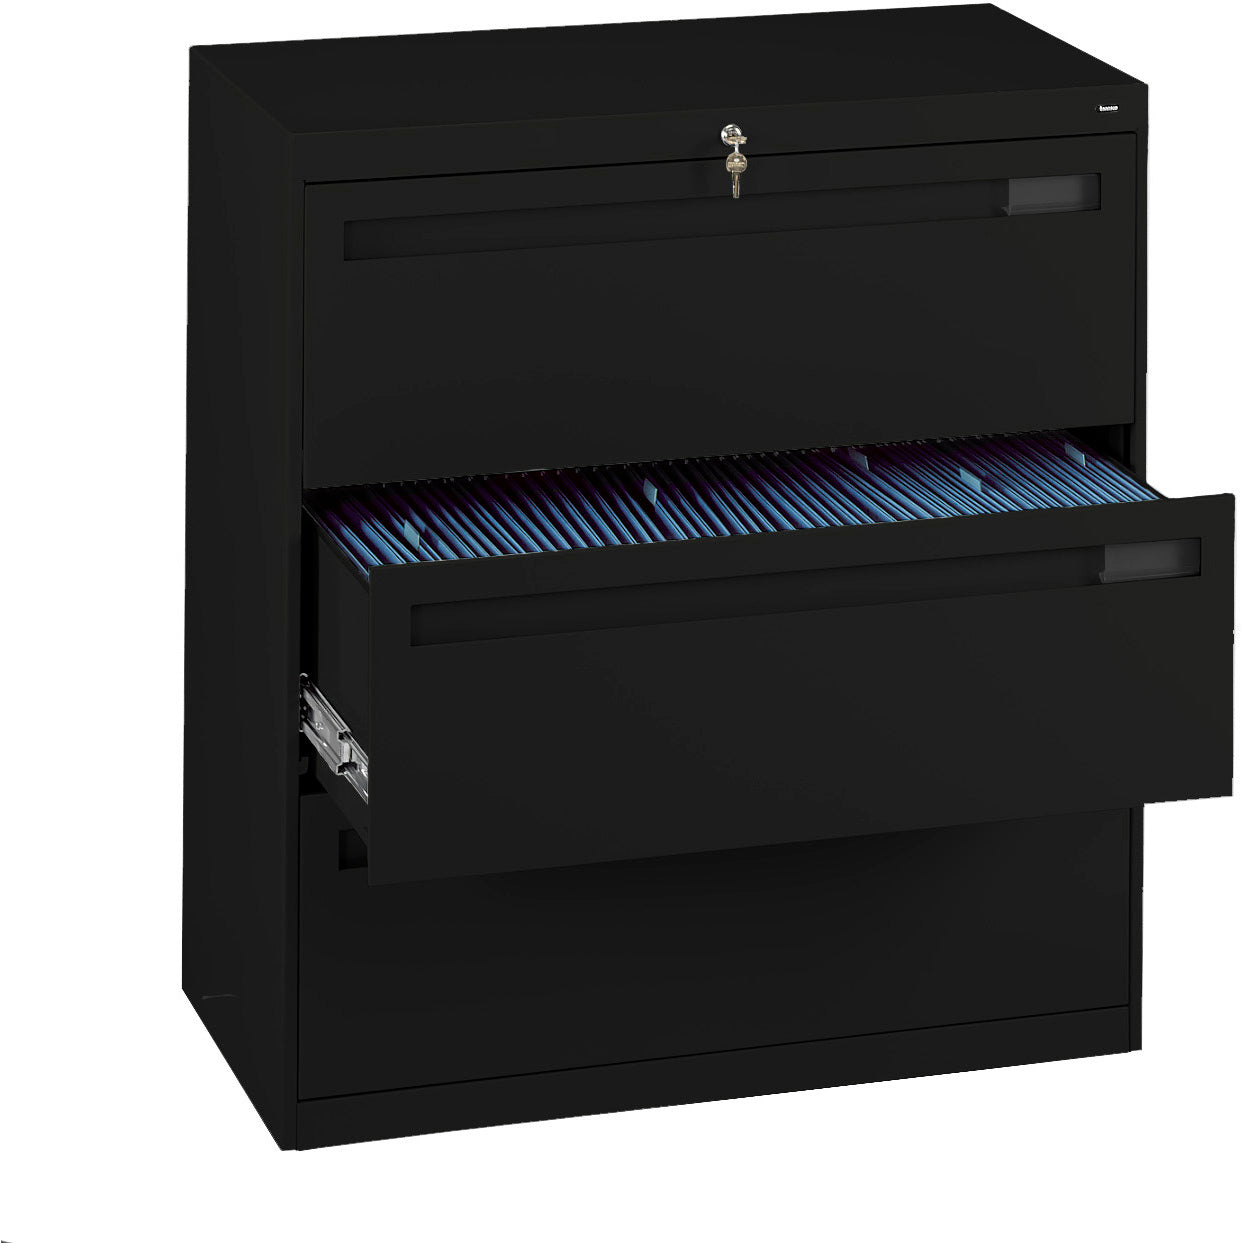 Tennsco 36" Wide Three-Drawer Lateral File with Retractable Doors, LPL3636L31